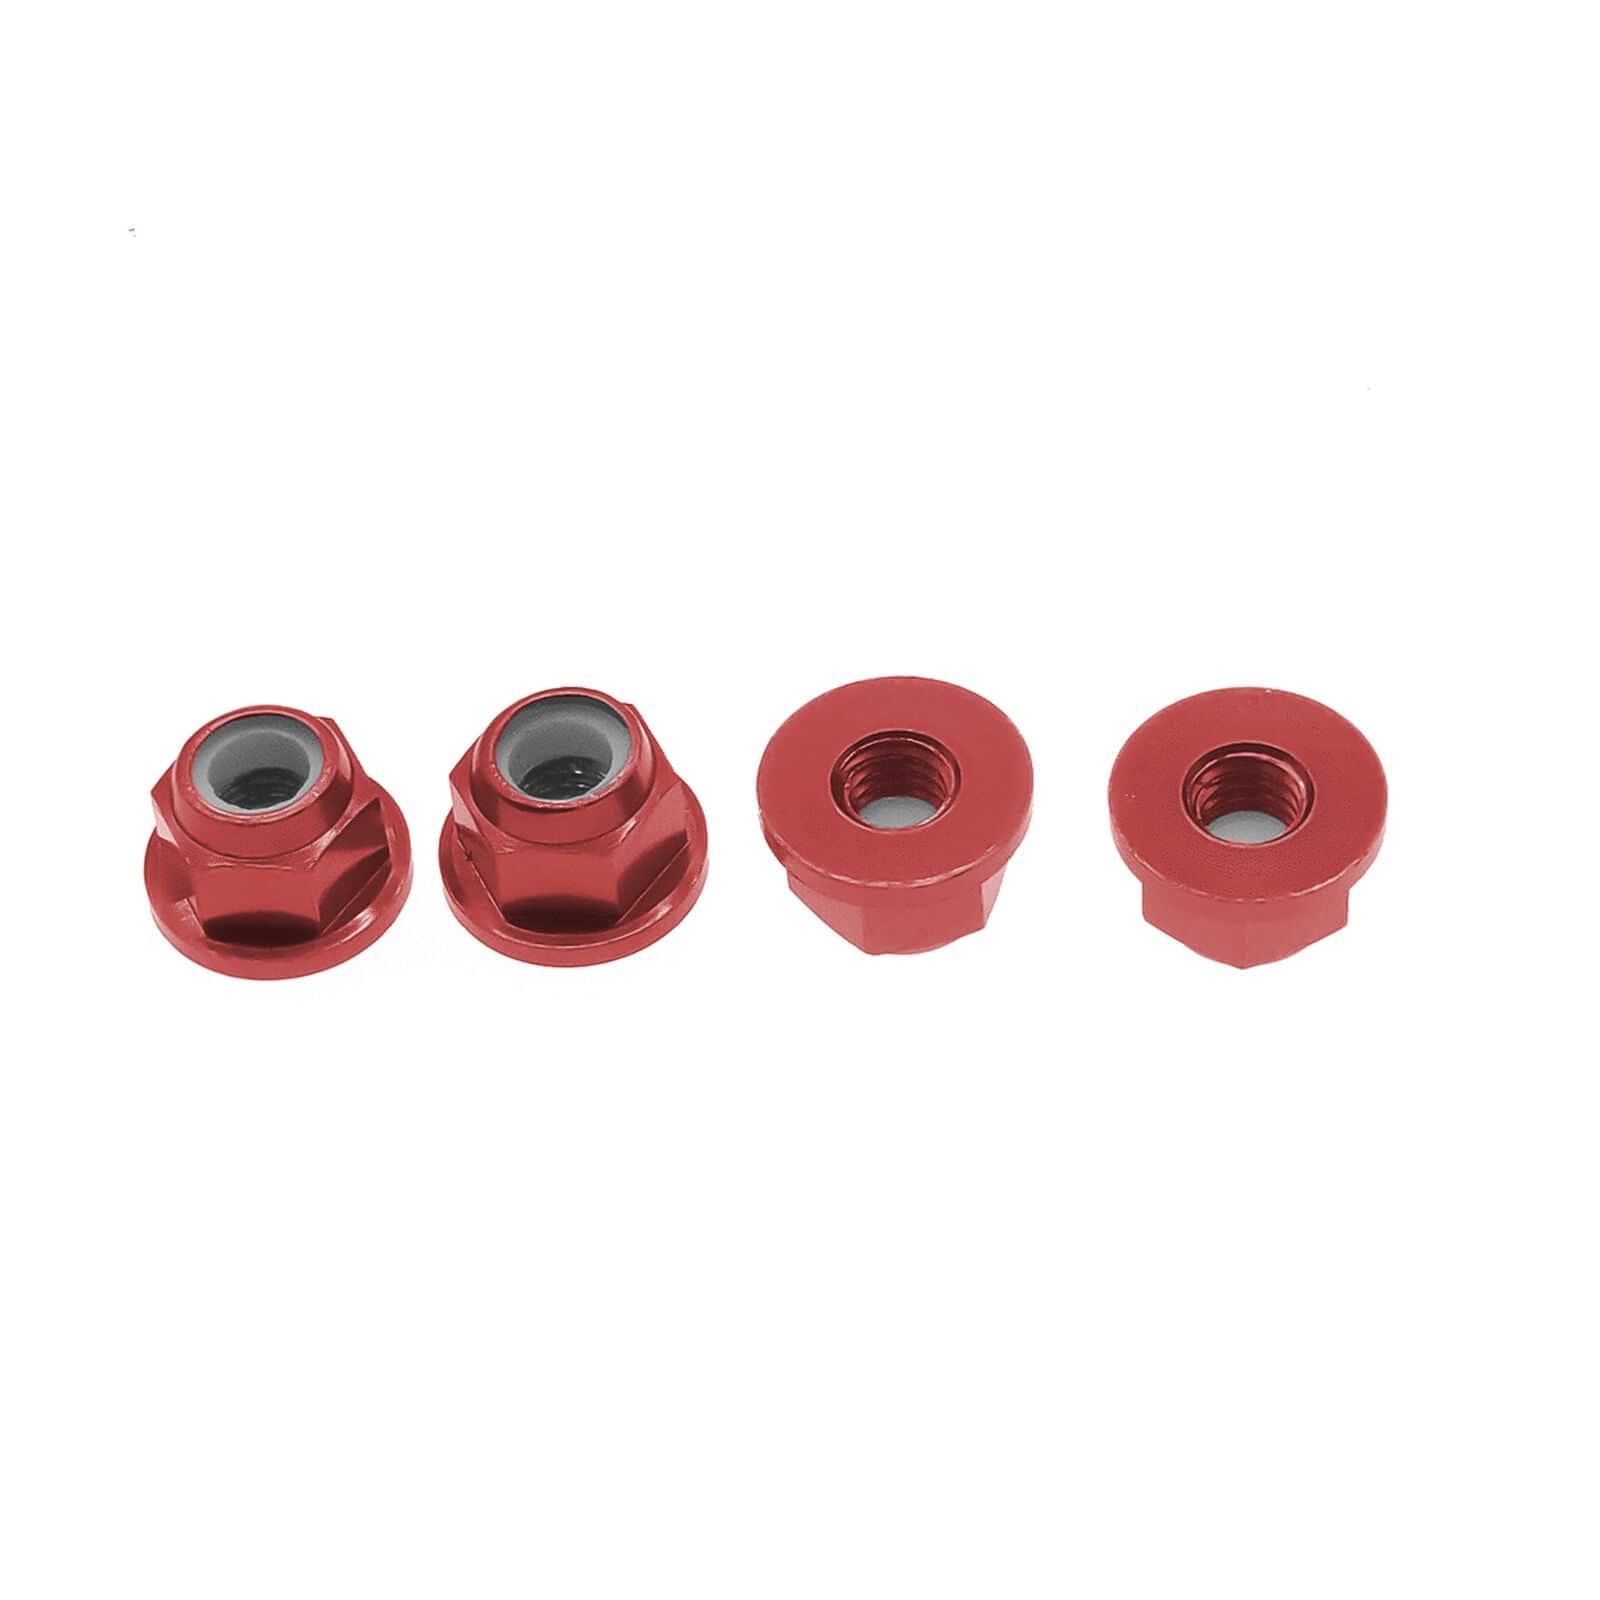 RCAWD ECX UPGRADE PARTS m4 4mm wheel hex lock nut RCAWD Aluminum CNC DIY Upgrade Hop-up parts For 1-10 ECX 2WD Series Ruckus AMP red